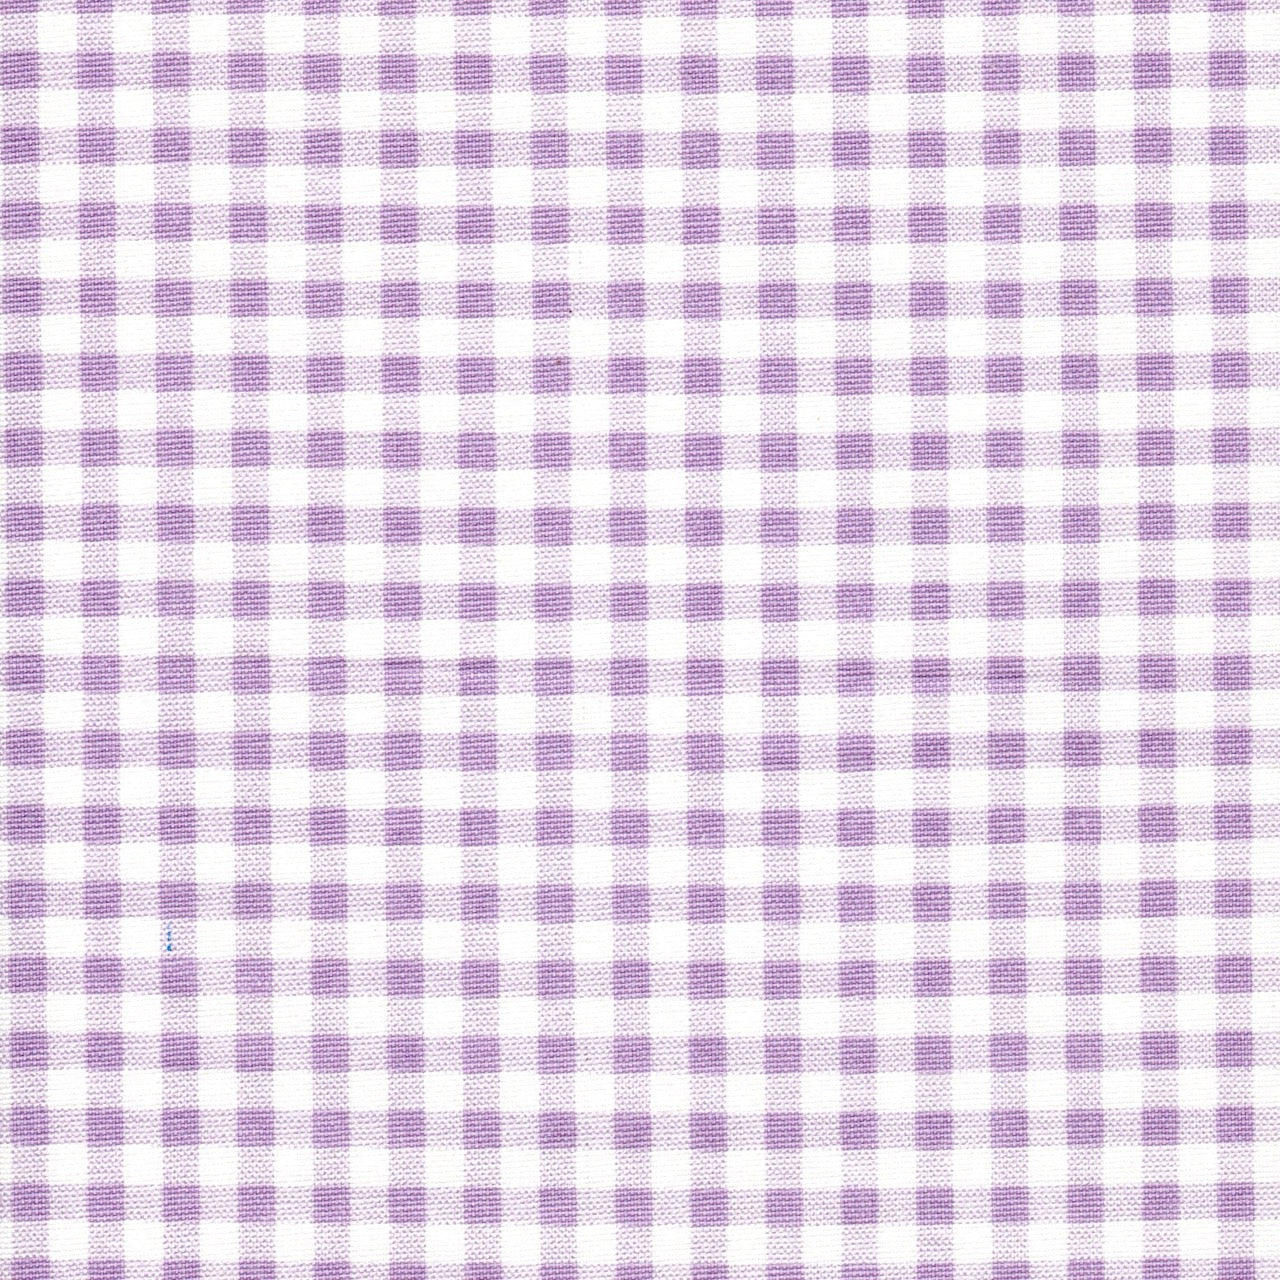 Scalloped Valance in Orchid Large Gingham Check on White